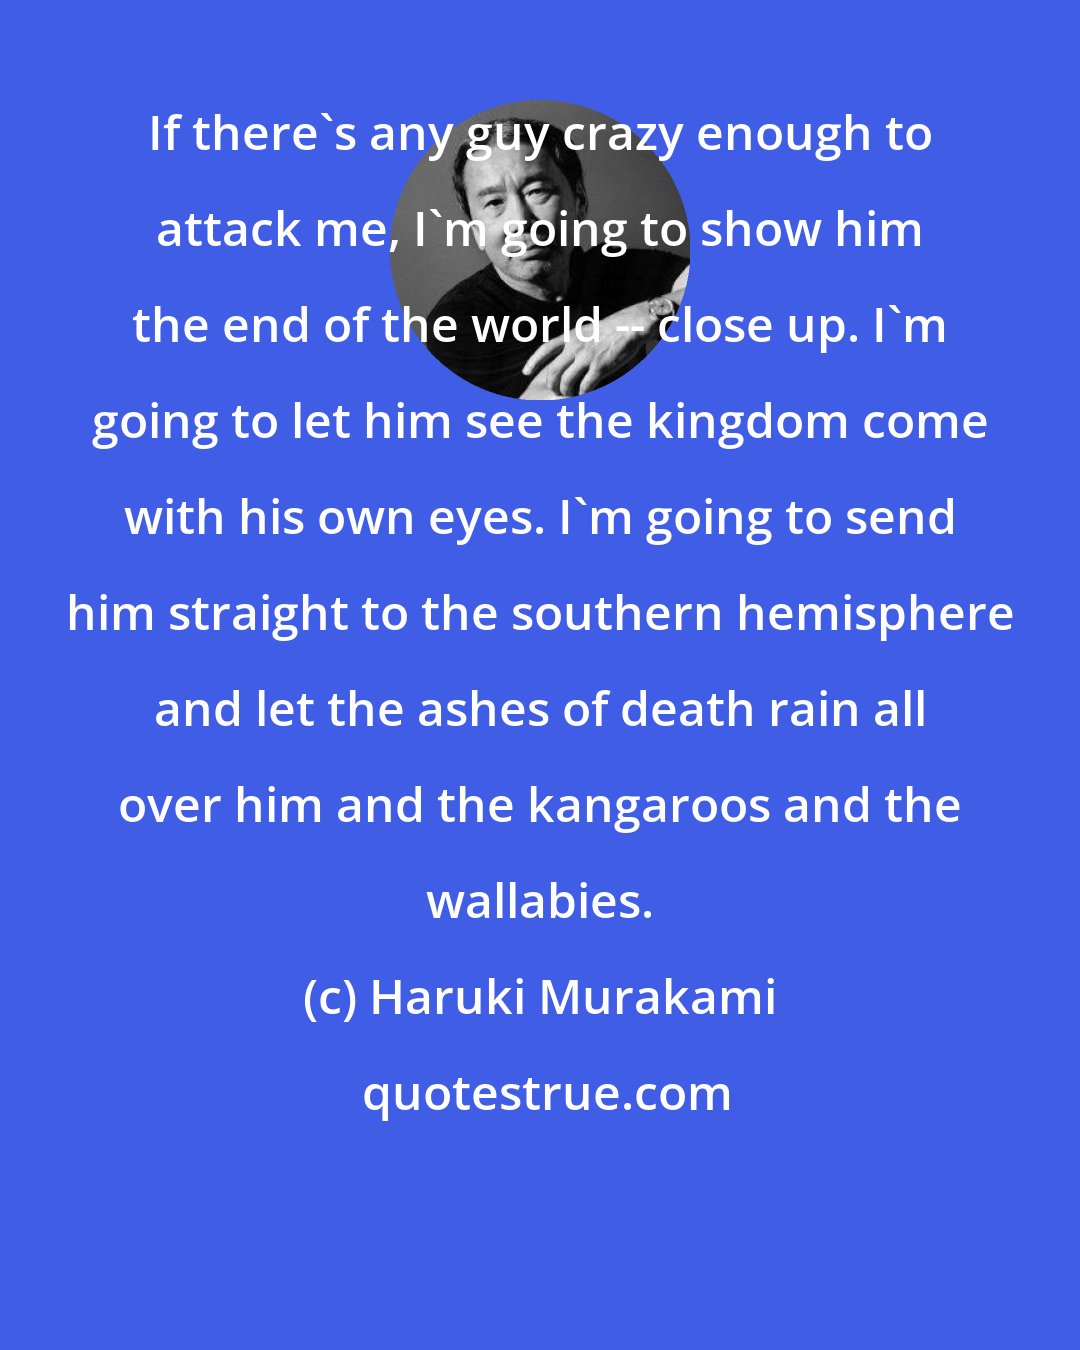 Haruki Murakami: If there's any guy crazy enough to attack me, I'm going to show him the end of the world -- close up. I'm going to let him see the kingdom come with his own eyes. I'm going to send him straight to the southern hemisphere and let the ashes of death rain all over him and the kangaroos and the wallabies.